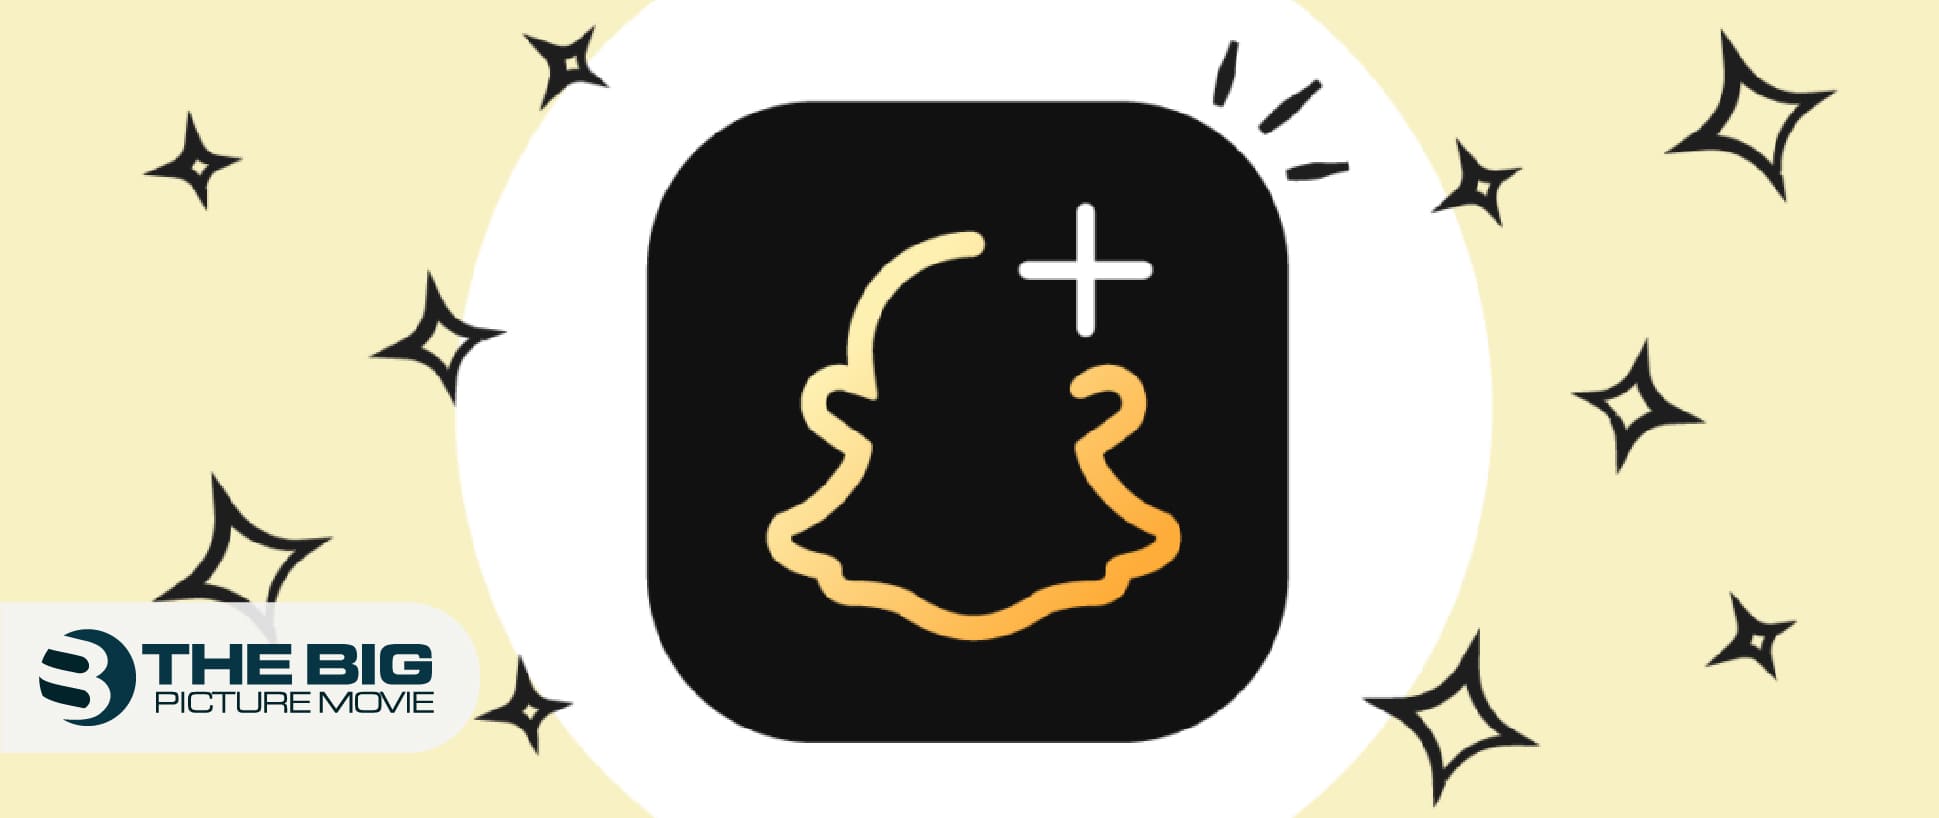 Premium Snapchat: Everything You Need to Know